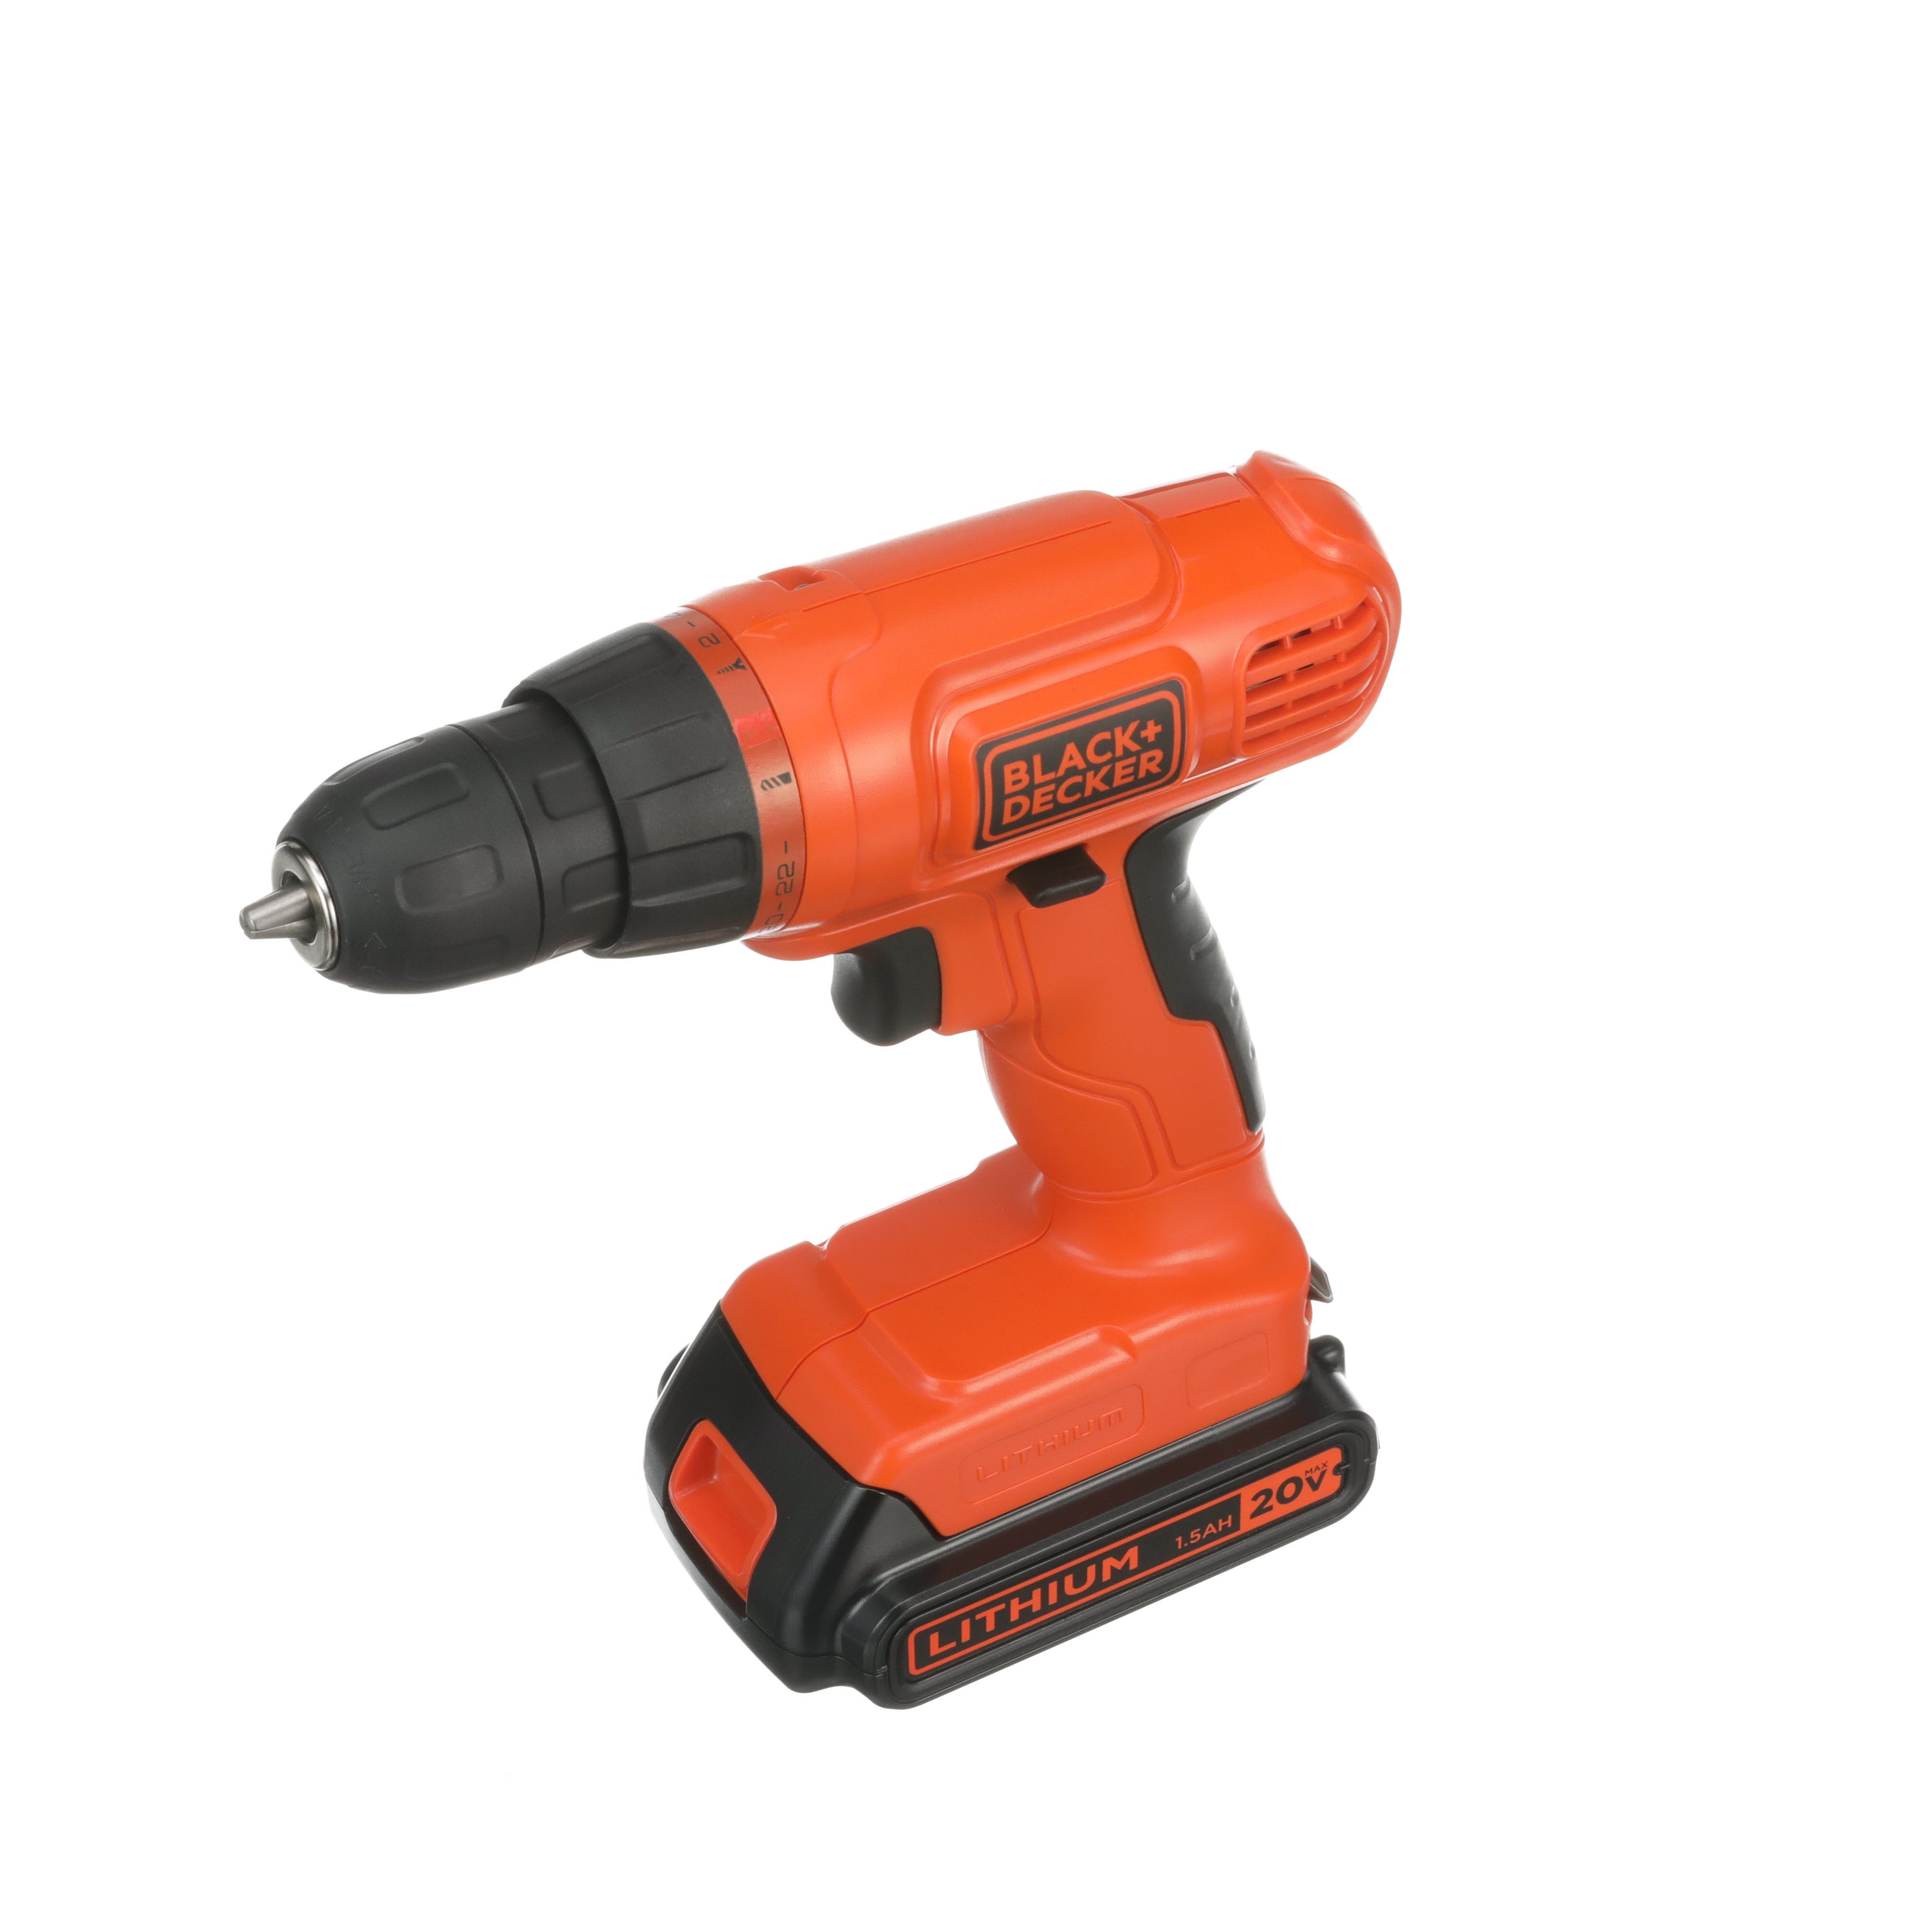 Black And Decker (LD120VA) Cordless Drill Unboxing And Review